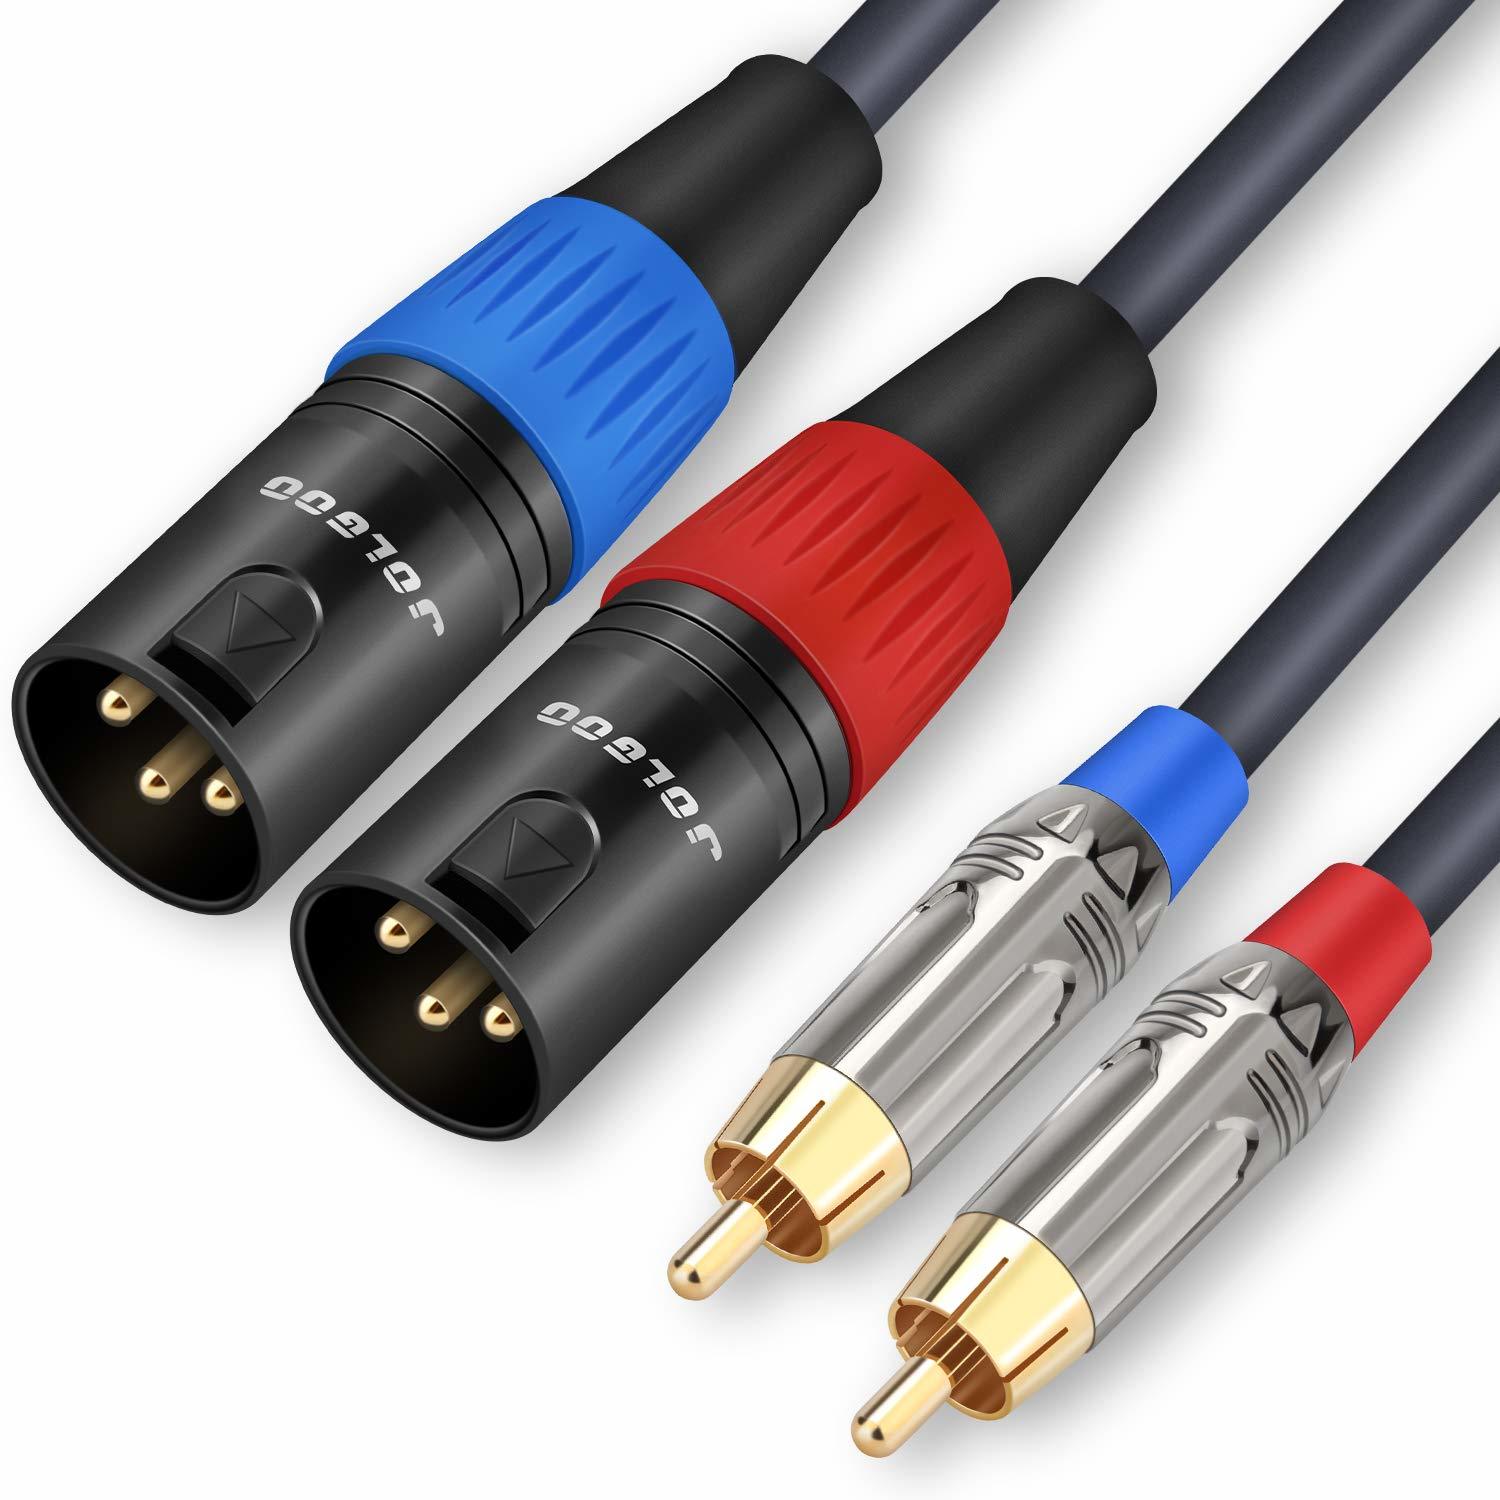 Uxcell RCA female Plug Jack Connector Adapter to Bare Wire Open End Video  RCA Cable 4 pack